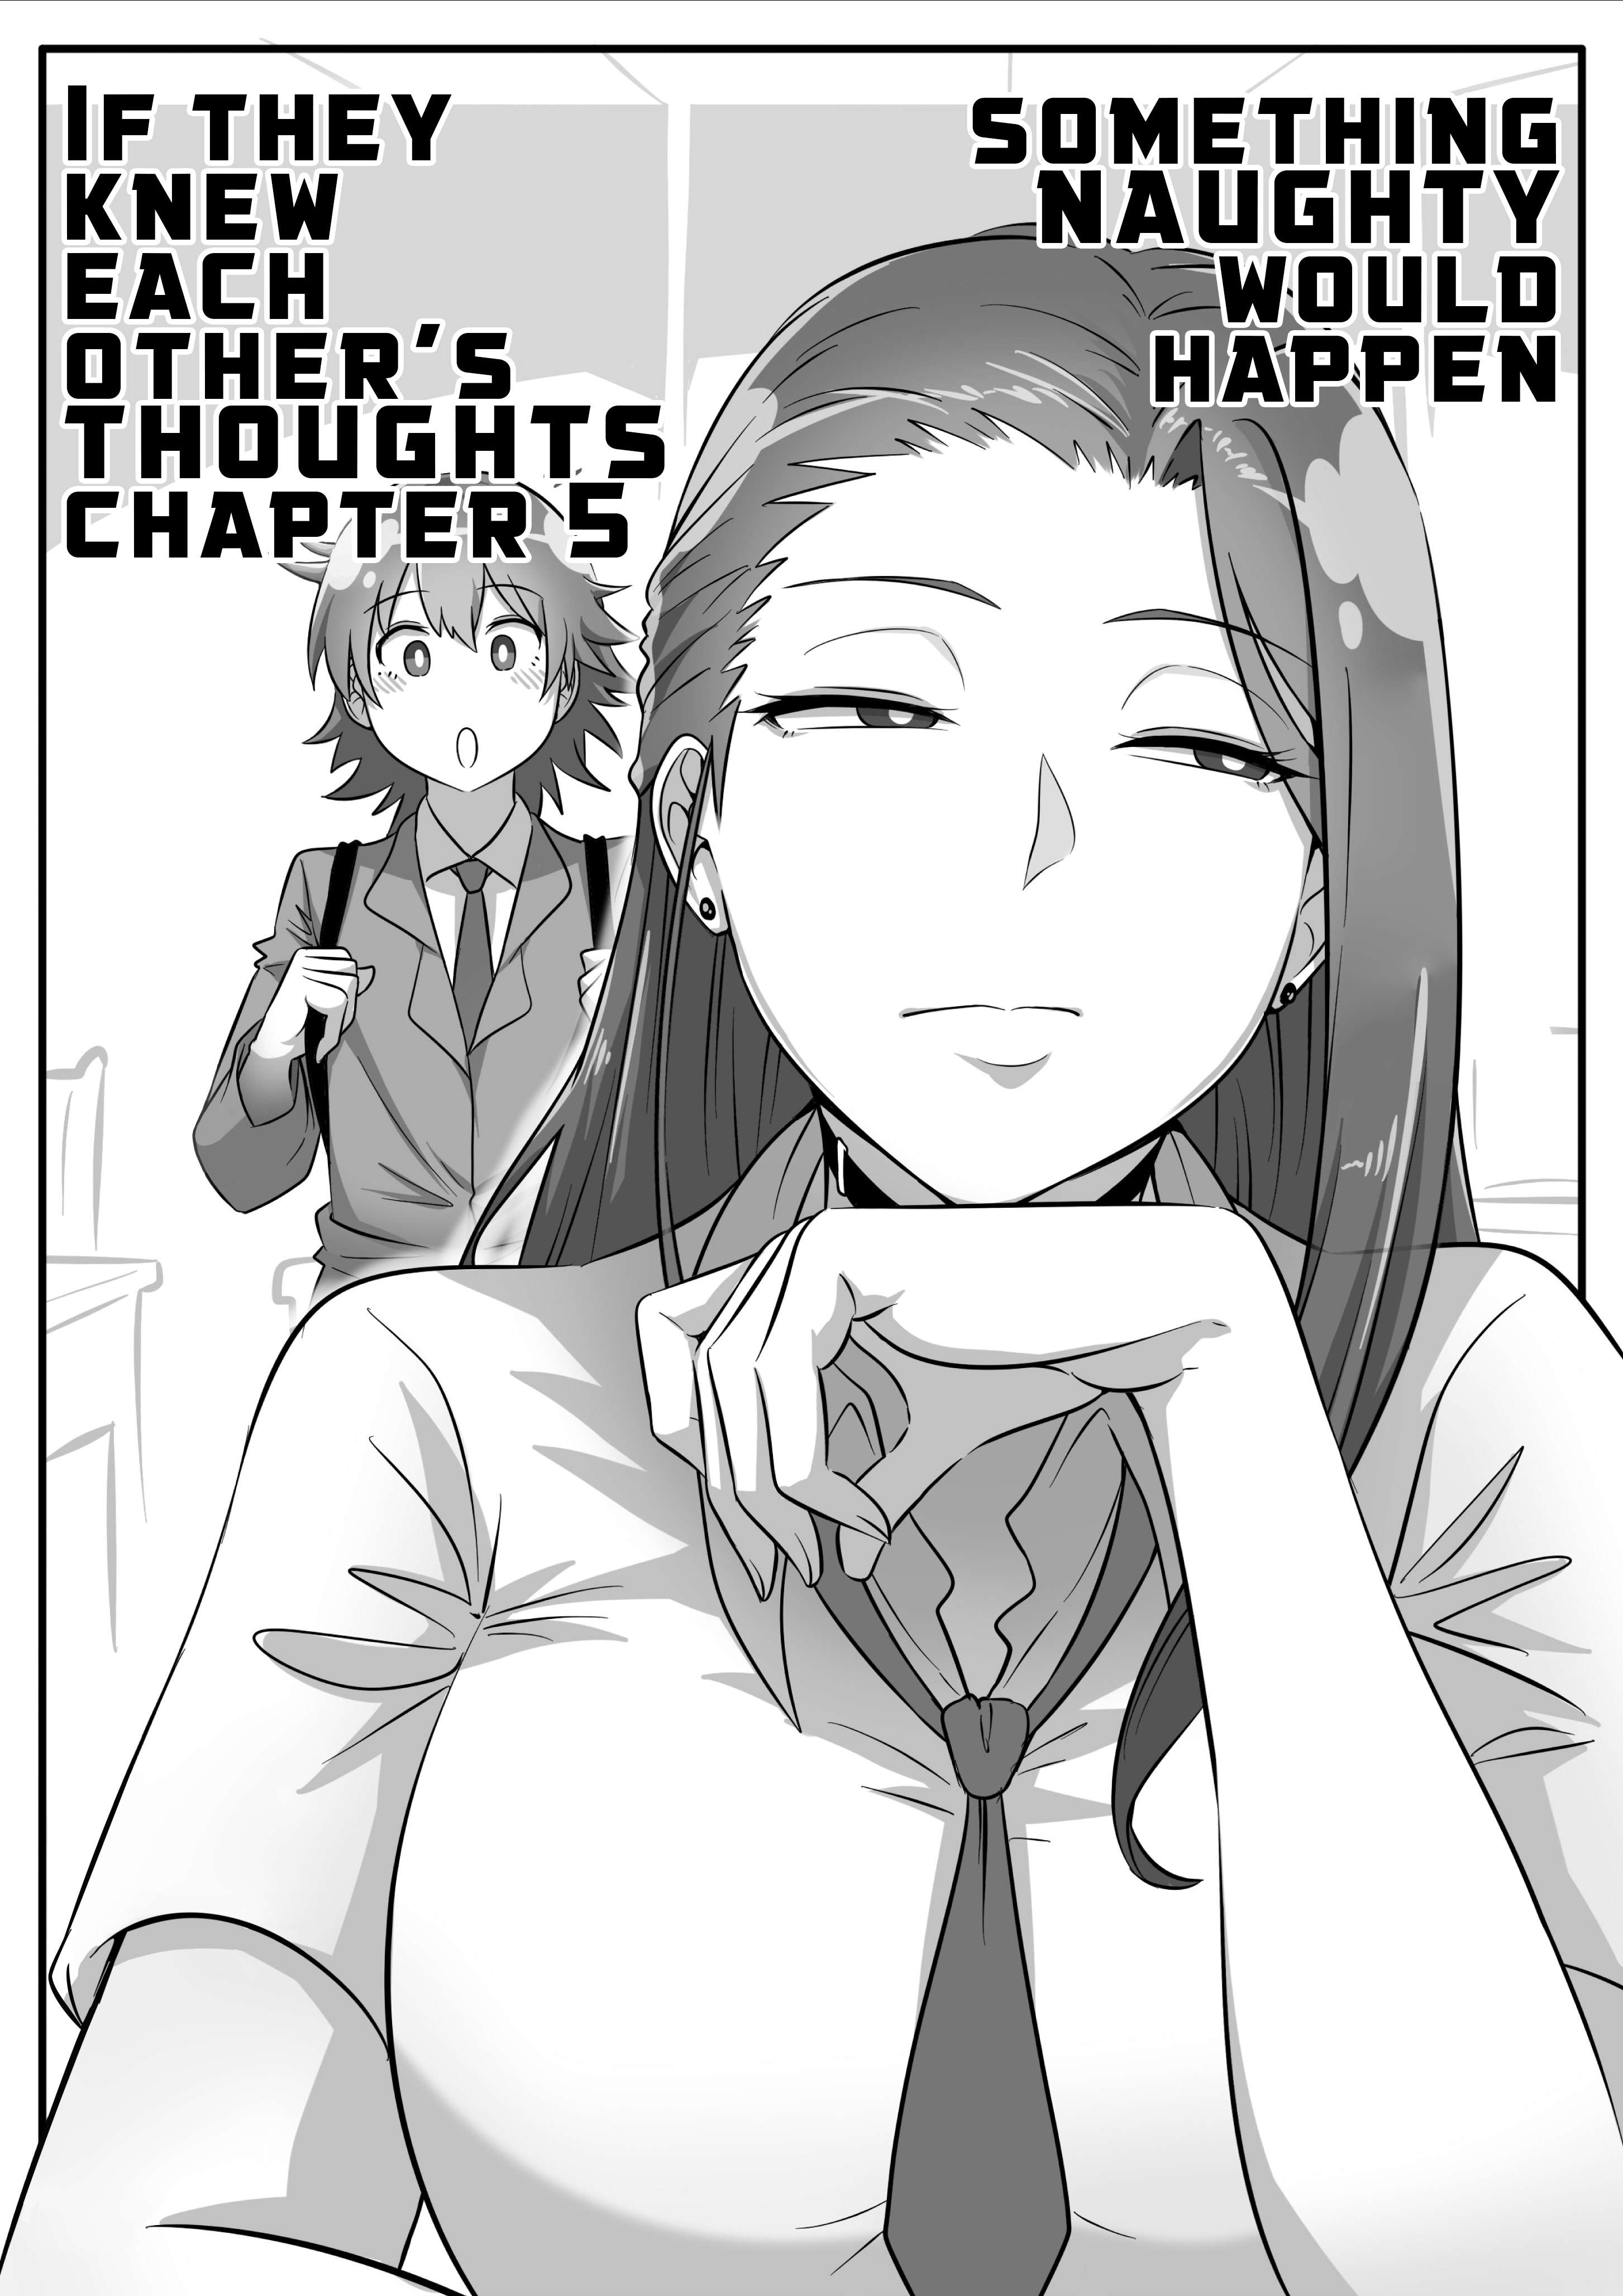 Something Naughty Would Happen If They Knew Each Other's Thoughts - chapter 5 - #1